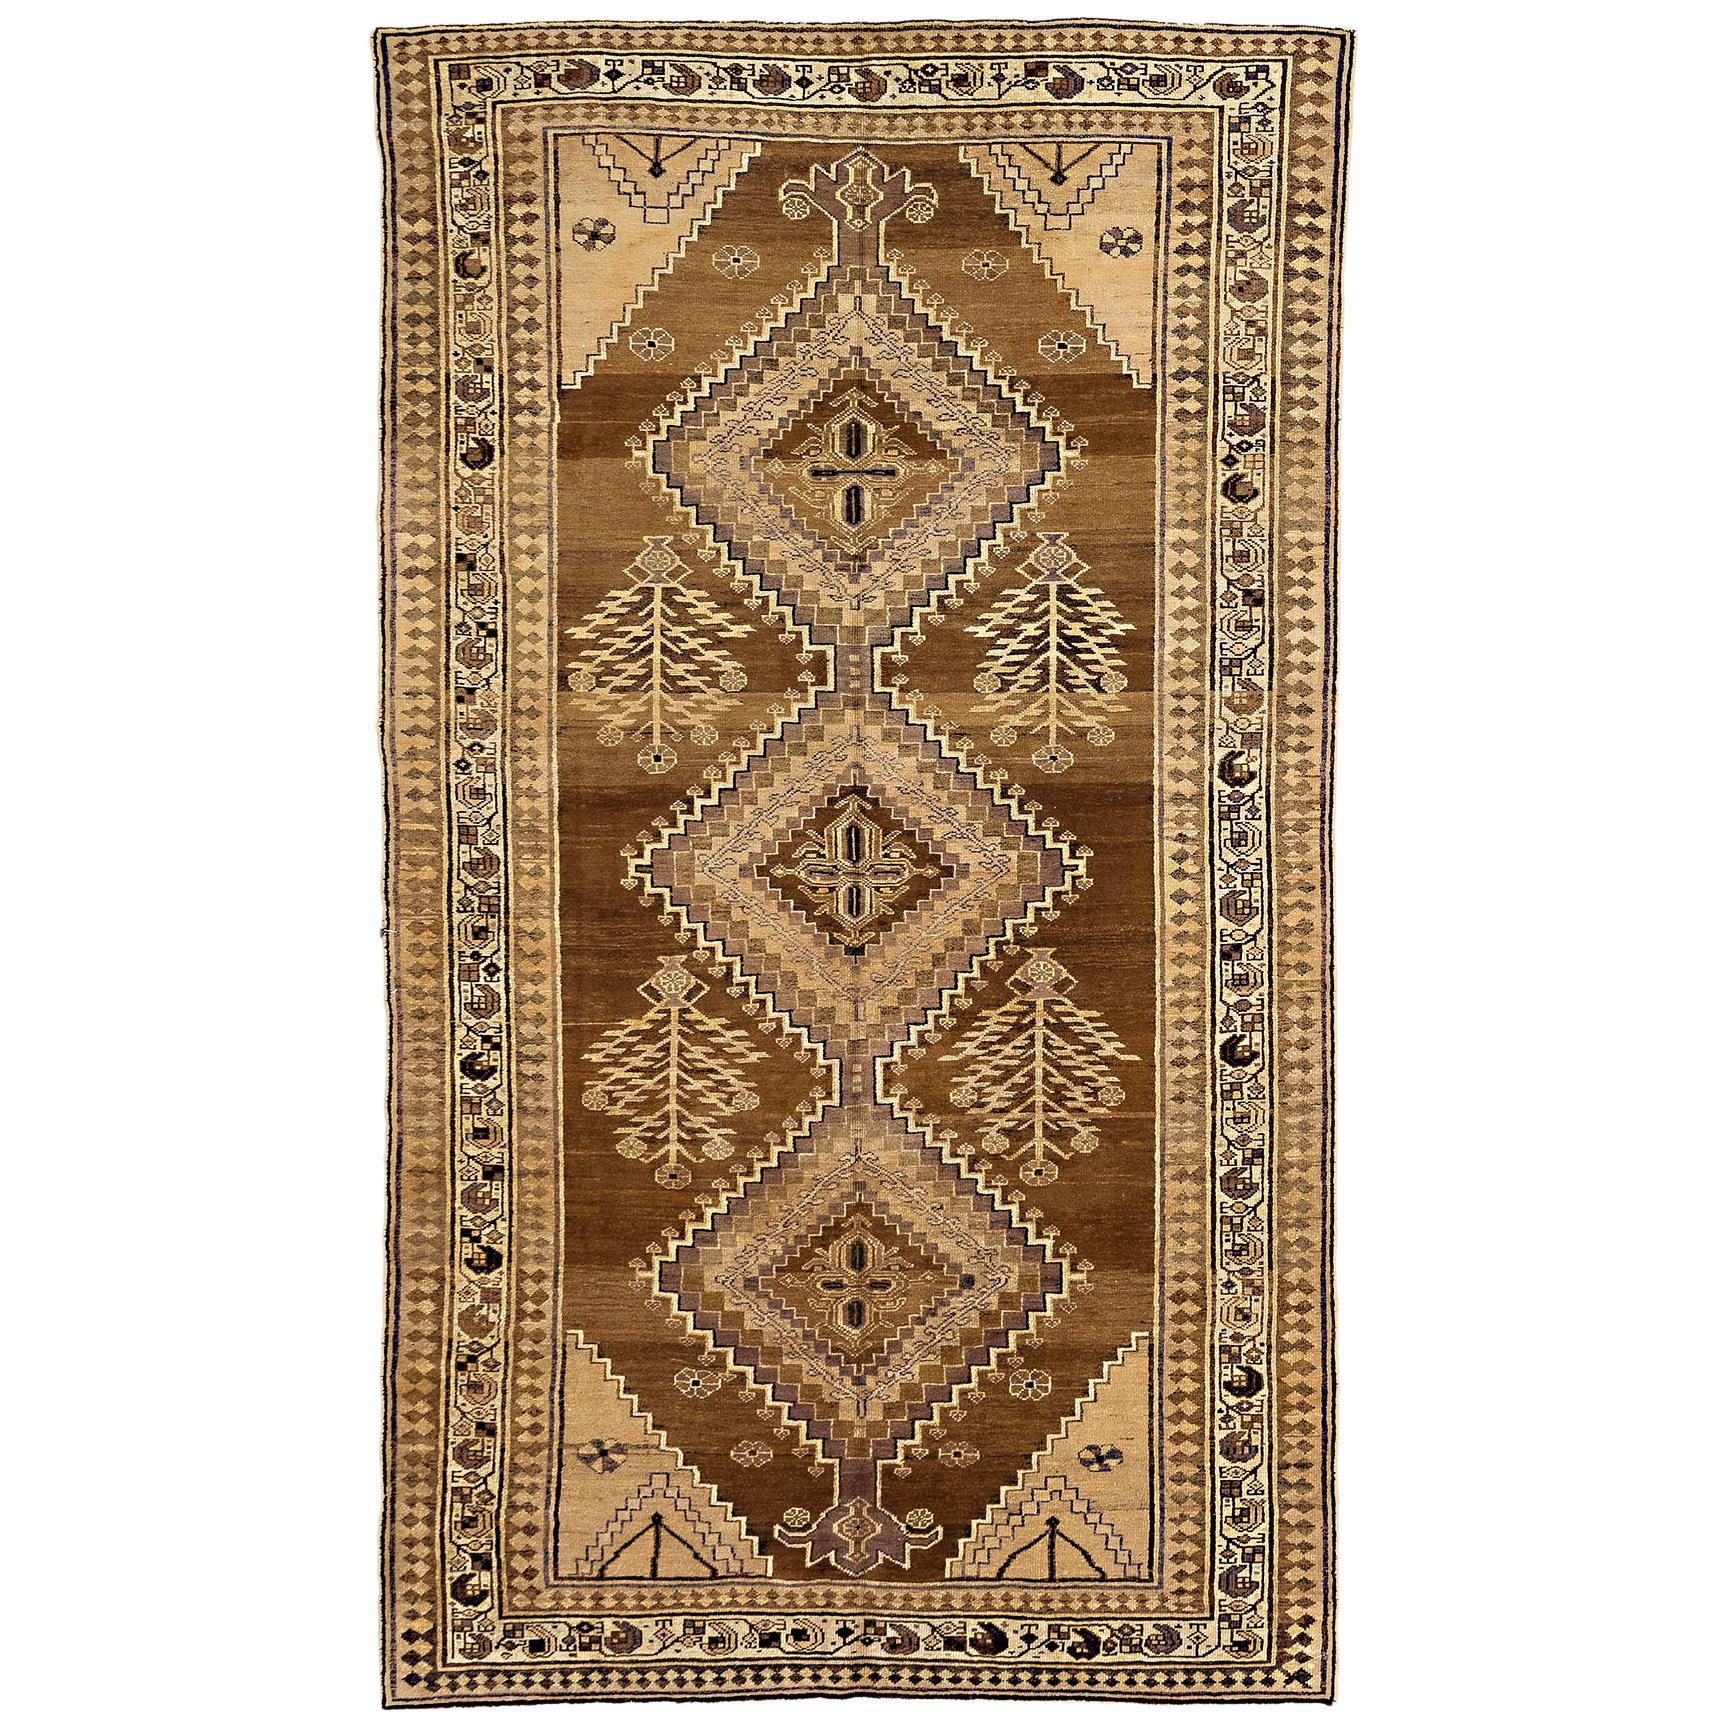 Antique Persian Hamadan Rug with Black and Brown Floral Details